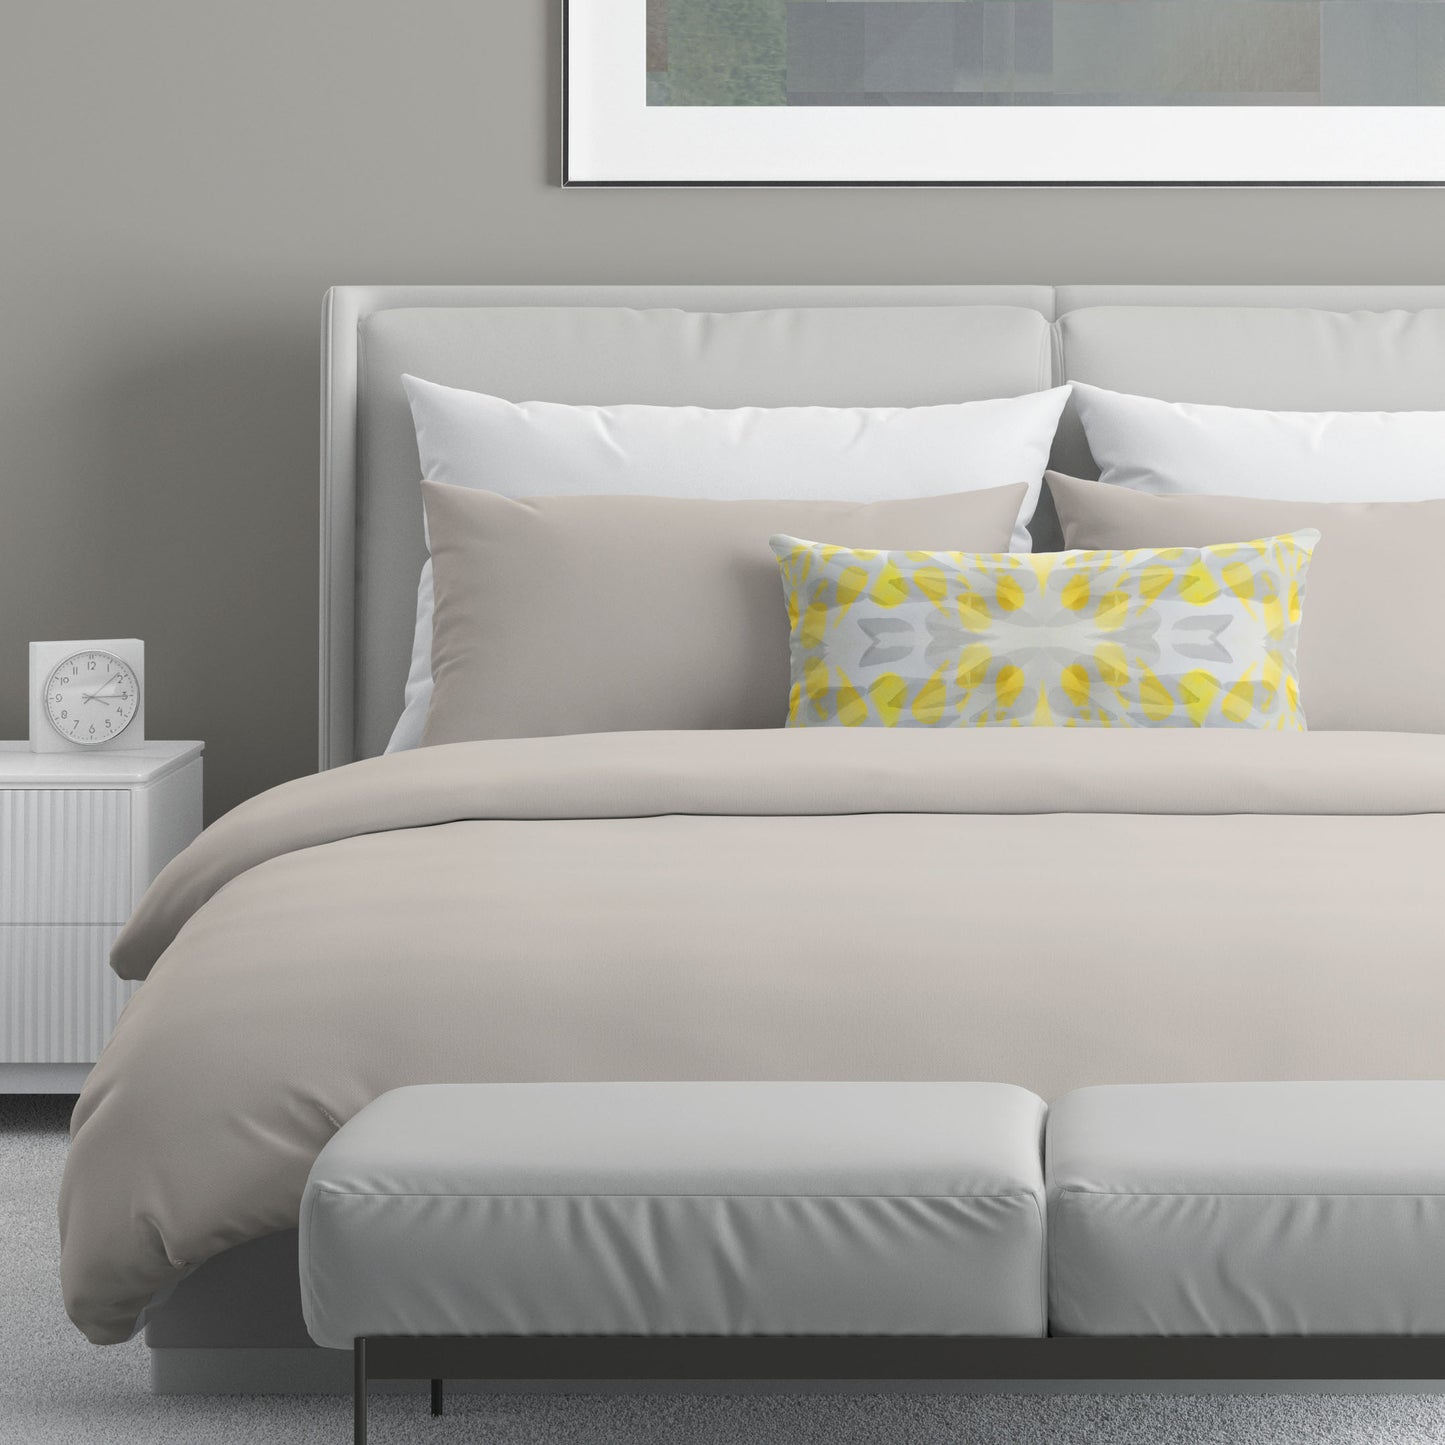 Neutral colored bedroom featuring a bed with an abstract yellow and gray patterned lumbar pillow.